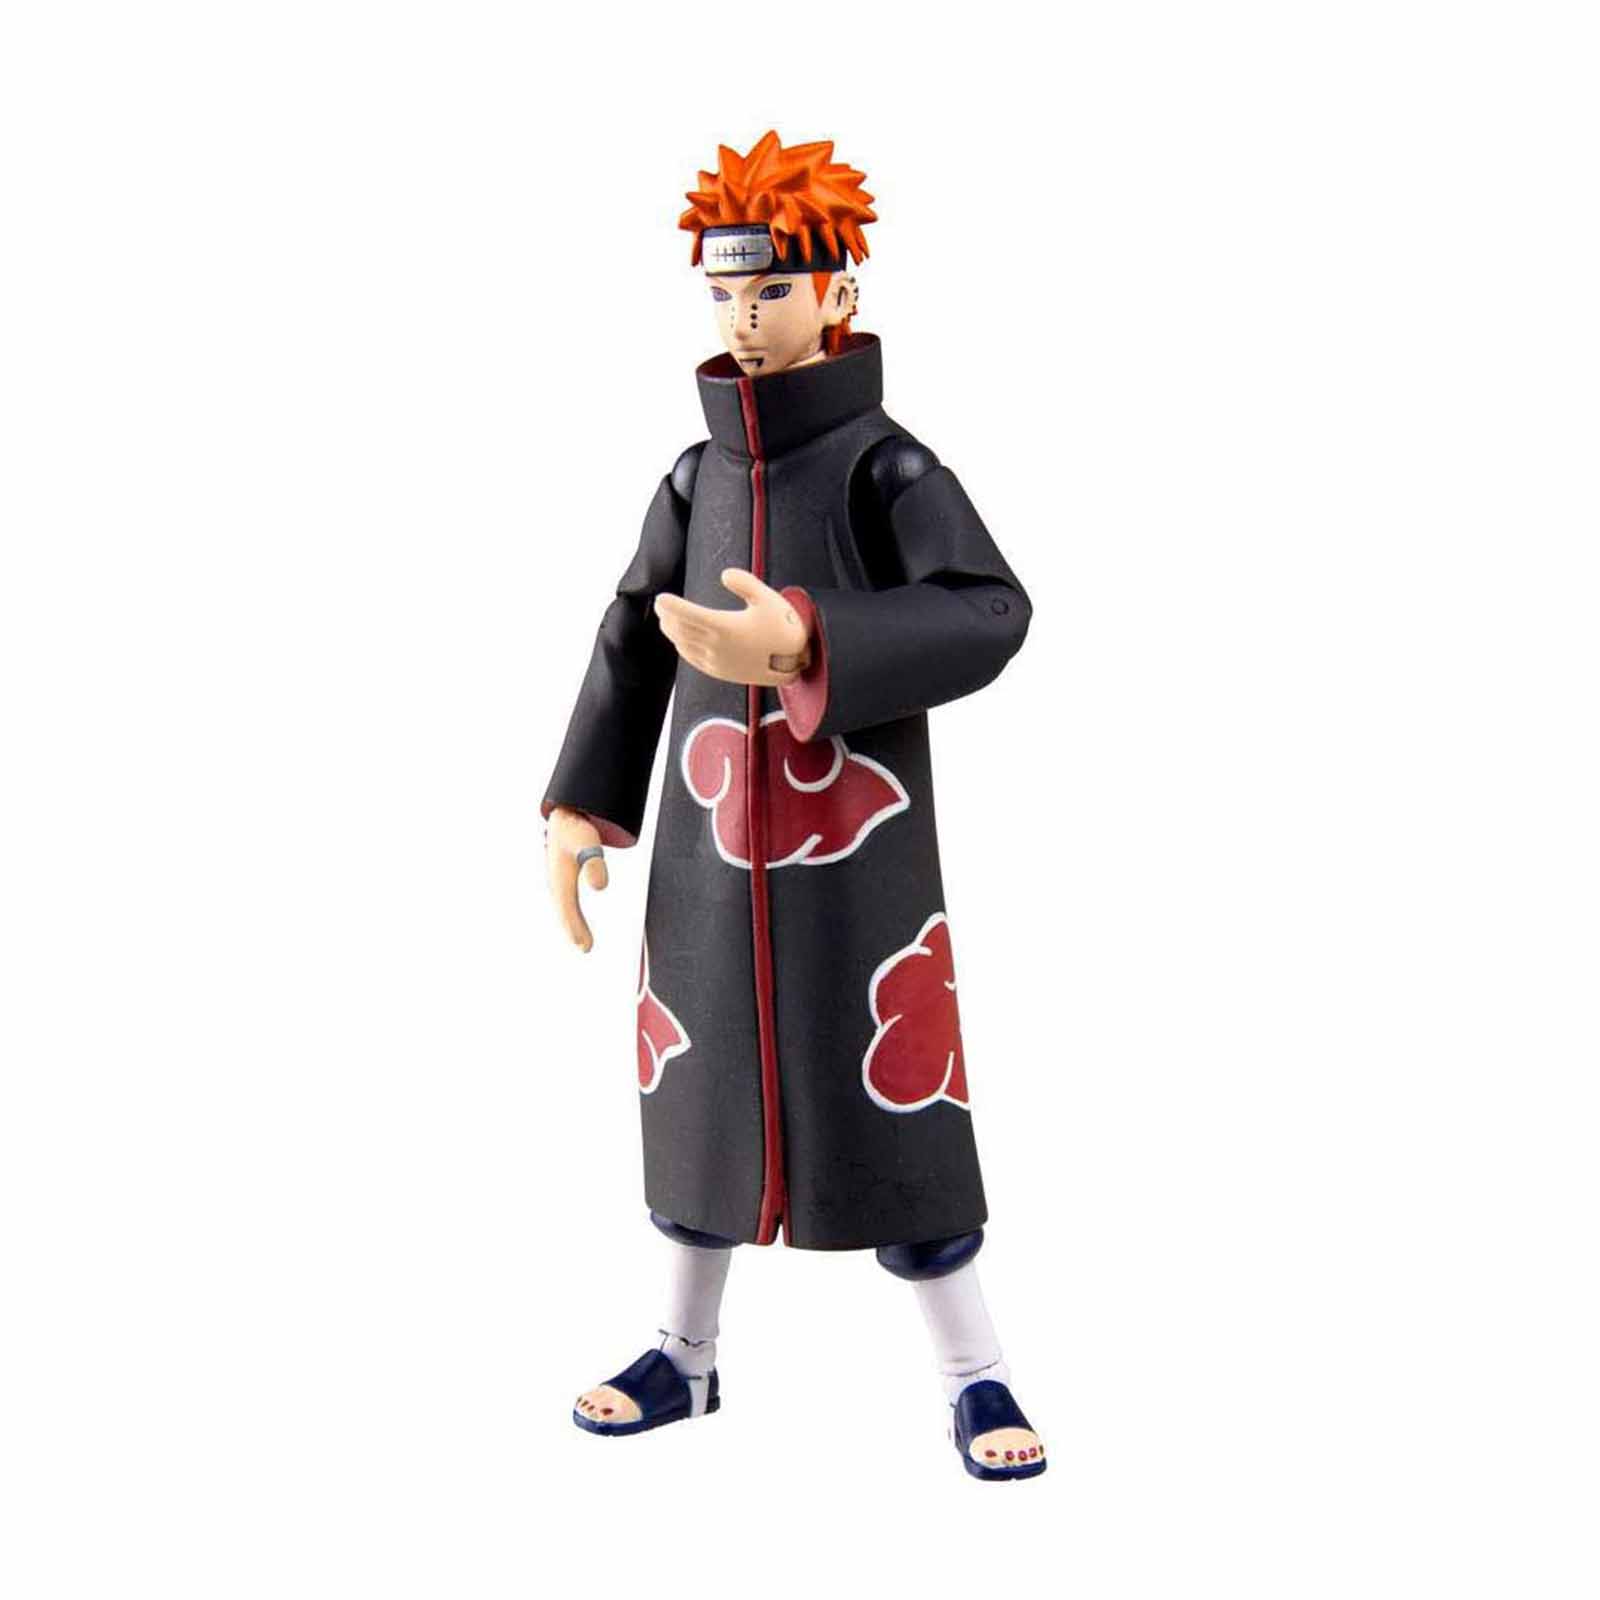 naruto 4 inch action figures